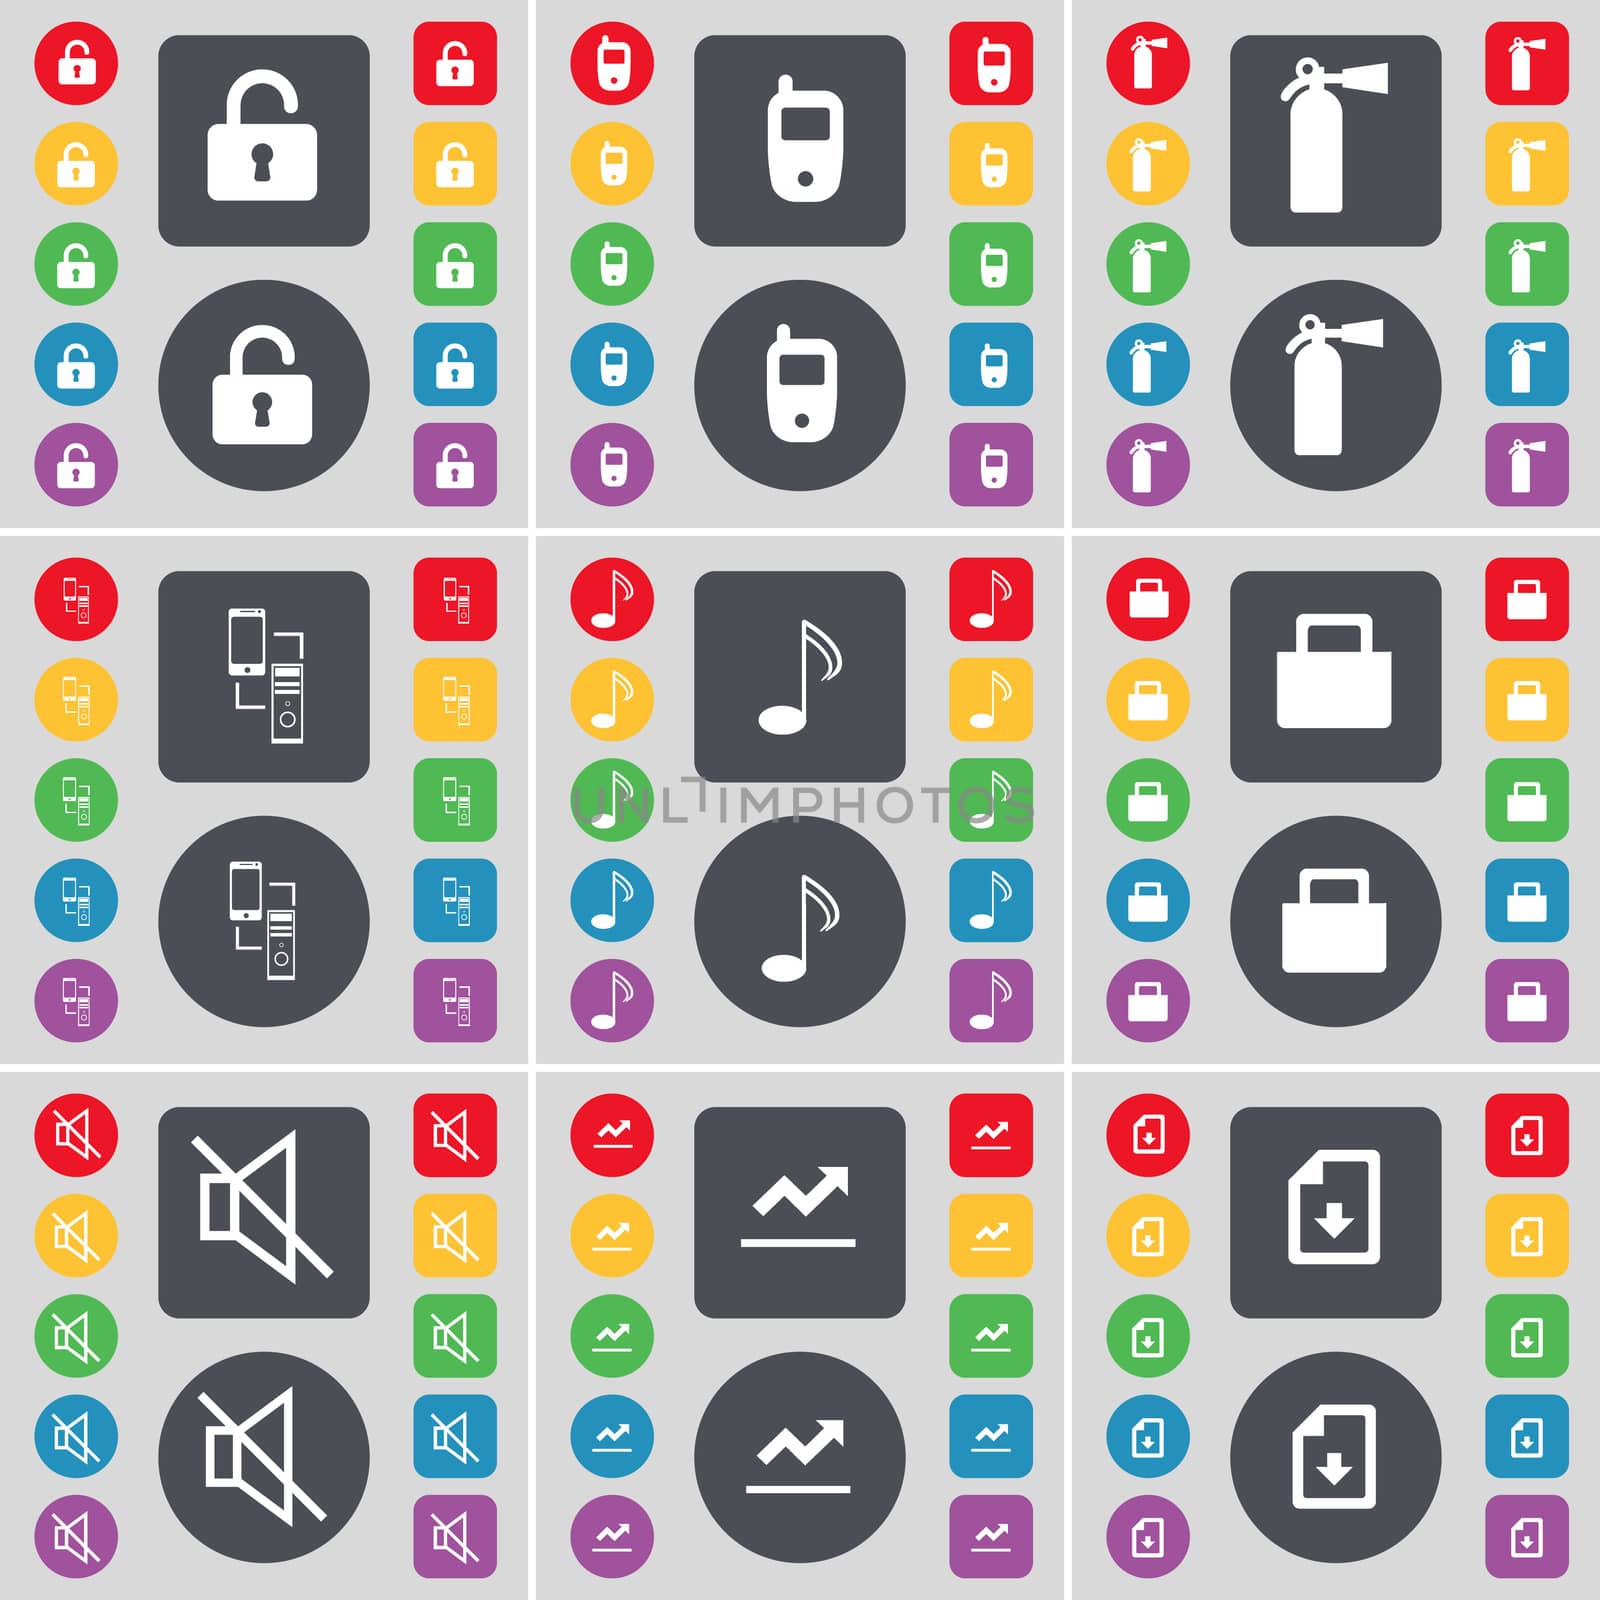 Lock, Mobile phone, Fire extinguisher, Connection, Note, Lock, Mute, Graph, File icon symbol. A large set of flat, colored buttons for your design. illustration